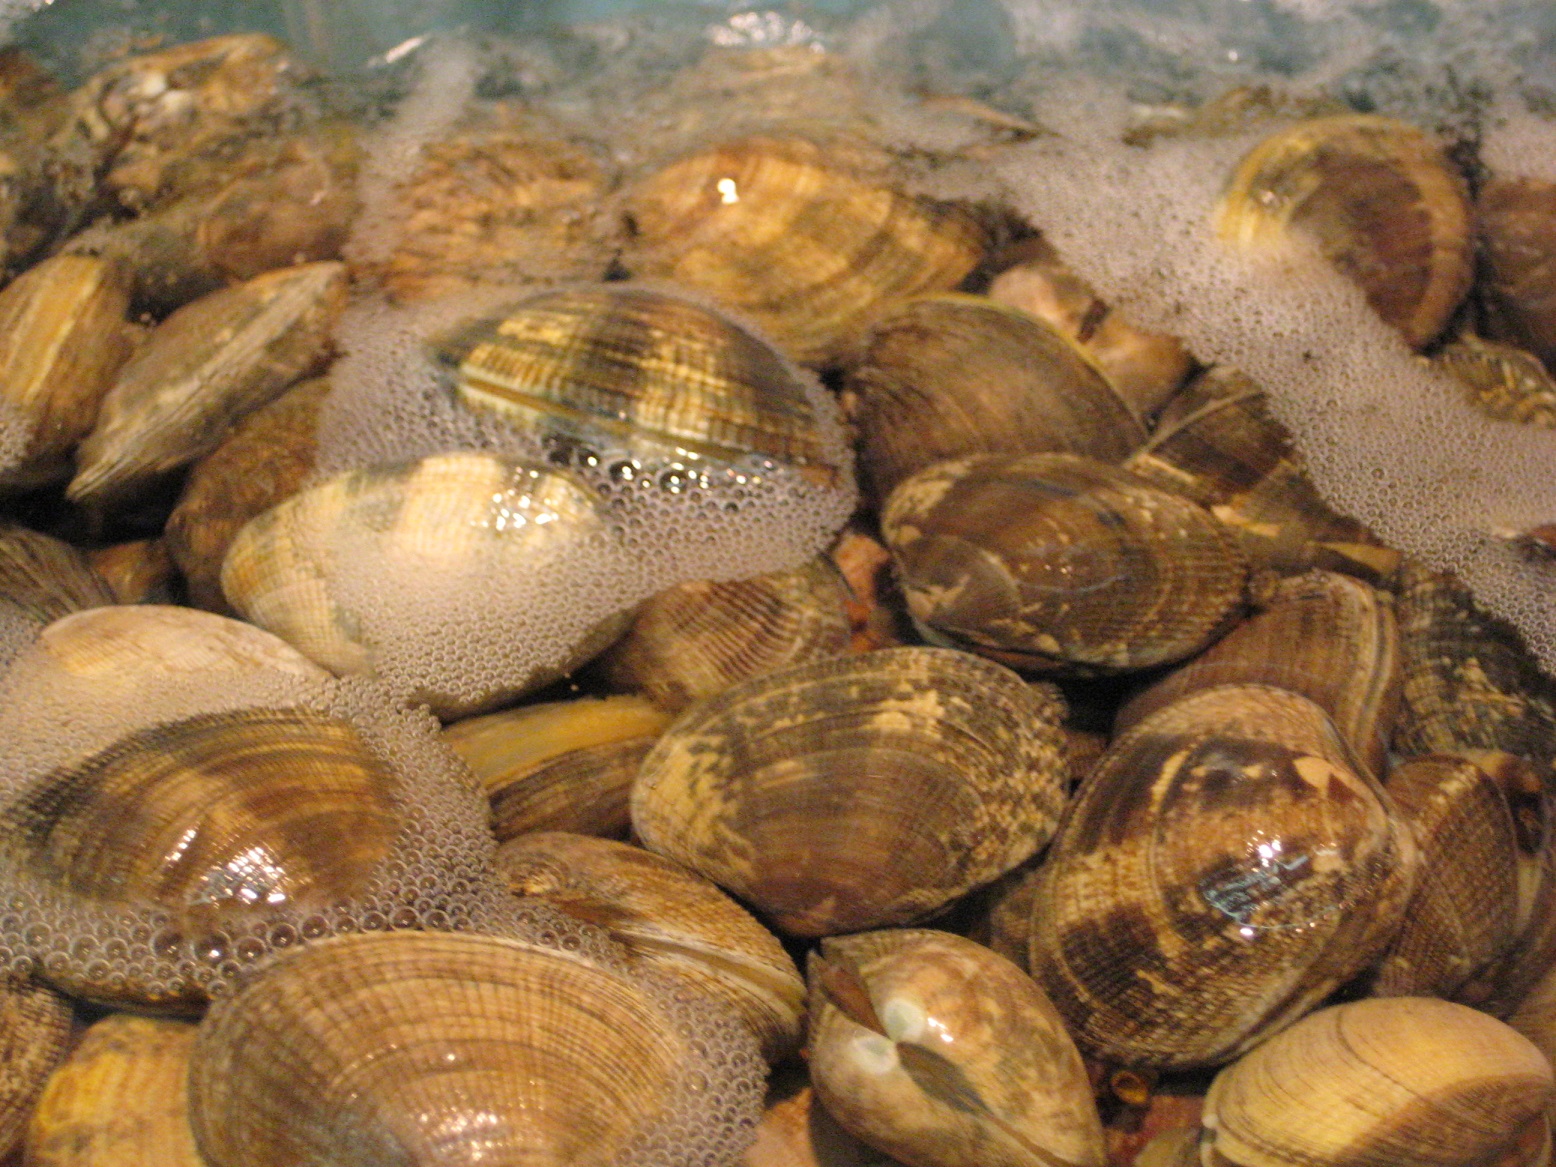 What's the difference between oysters, clams, mussels, and scallops